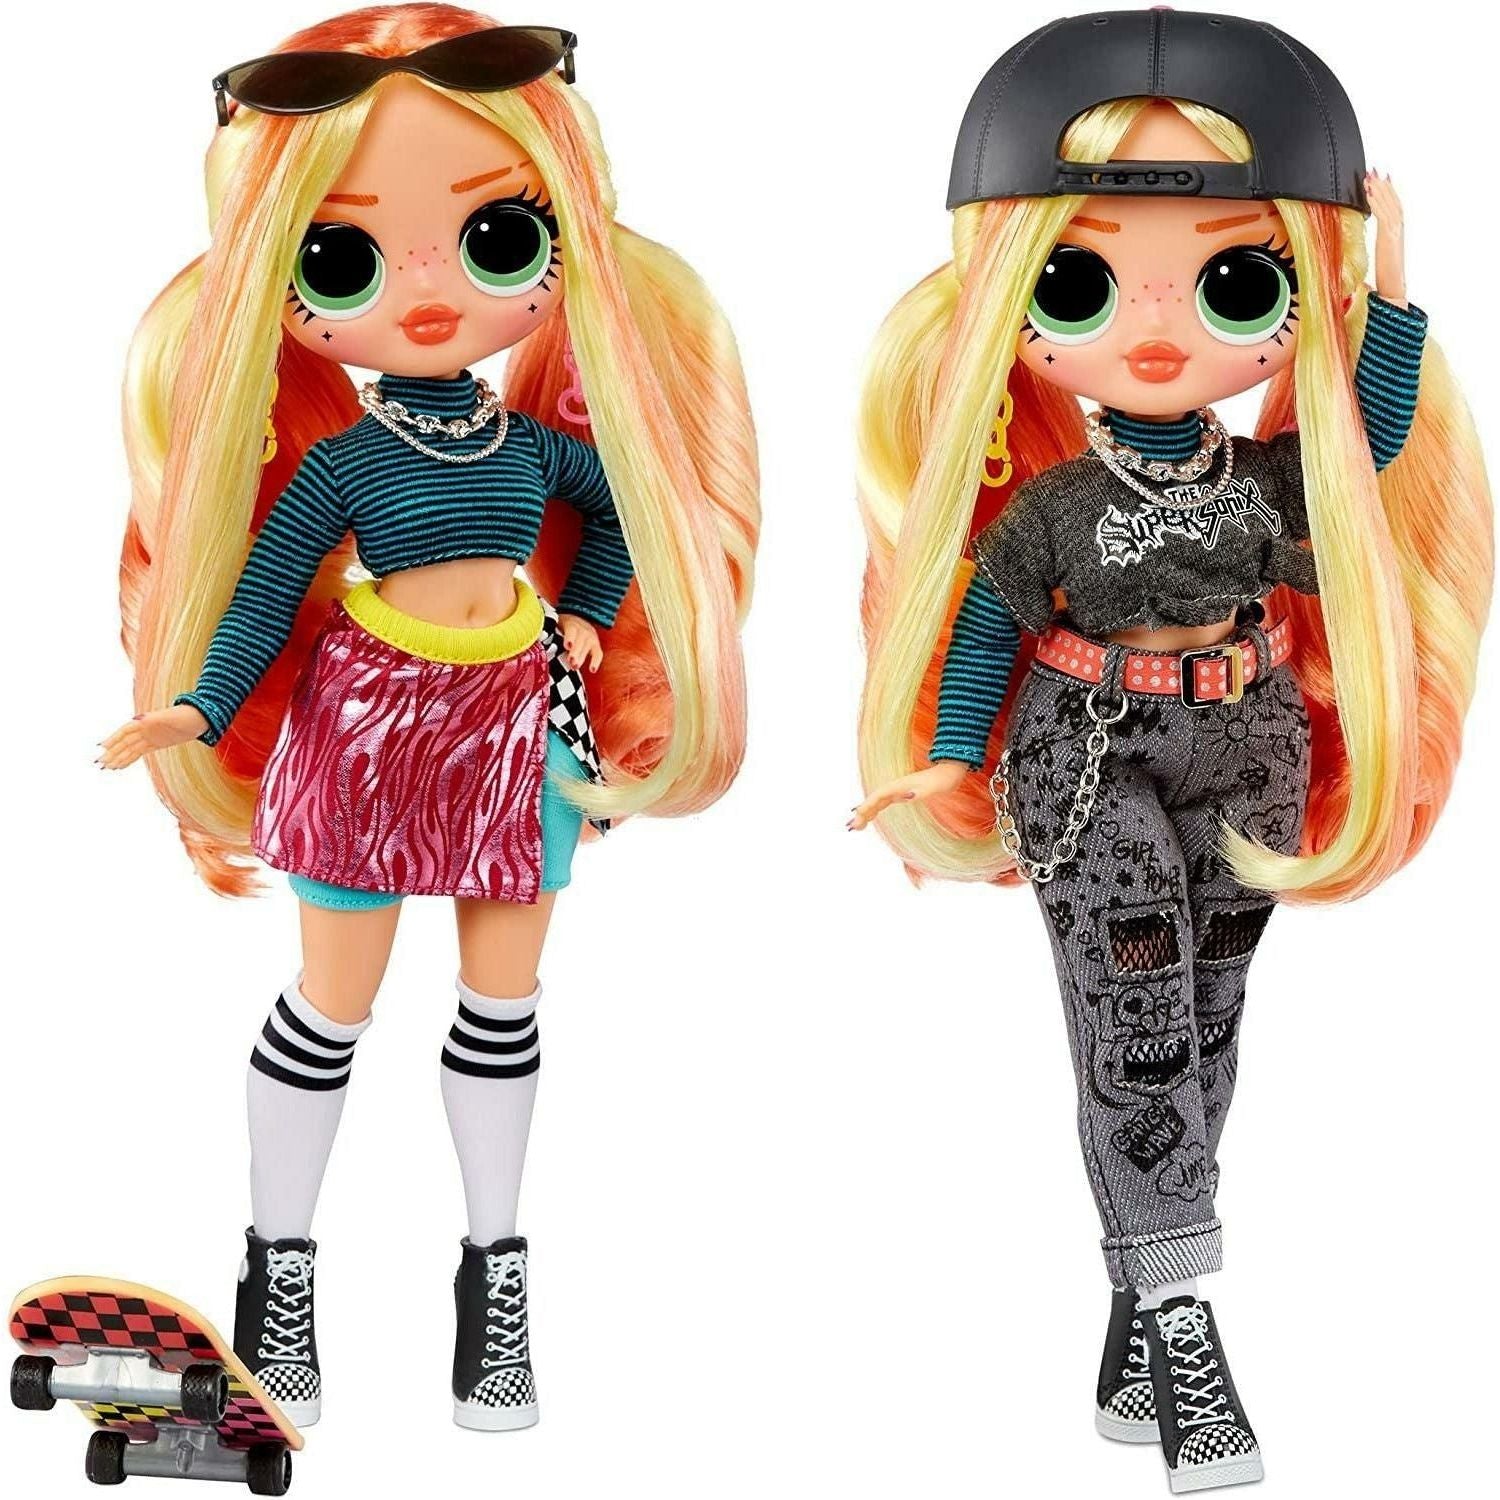 L.O.L Surprise O.M.G Skatepark Q.T. Fashion Doll with 20 Surprises - BumbleToys - 5-7 Years, Dolls, Fashion Dolls & Accessories, Girls, L.O.L, OXE, Pre-Order